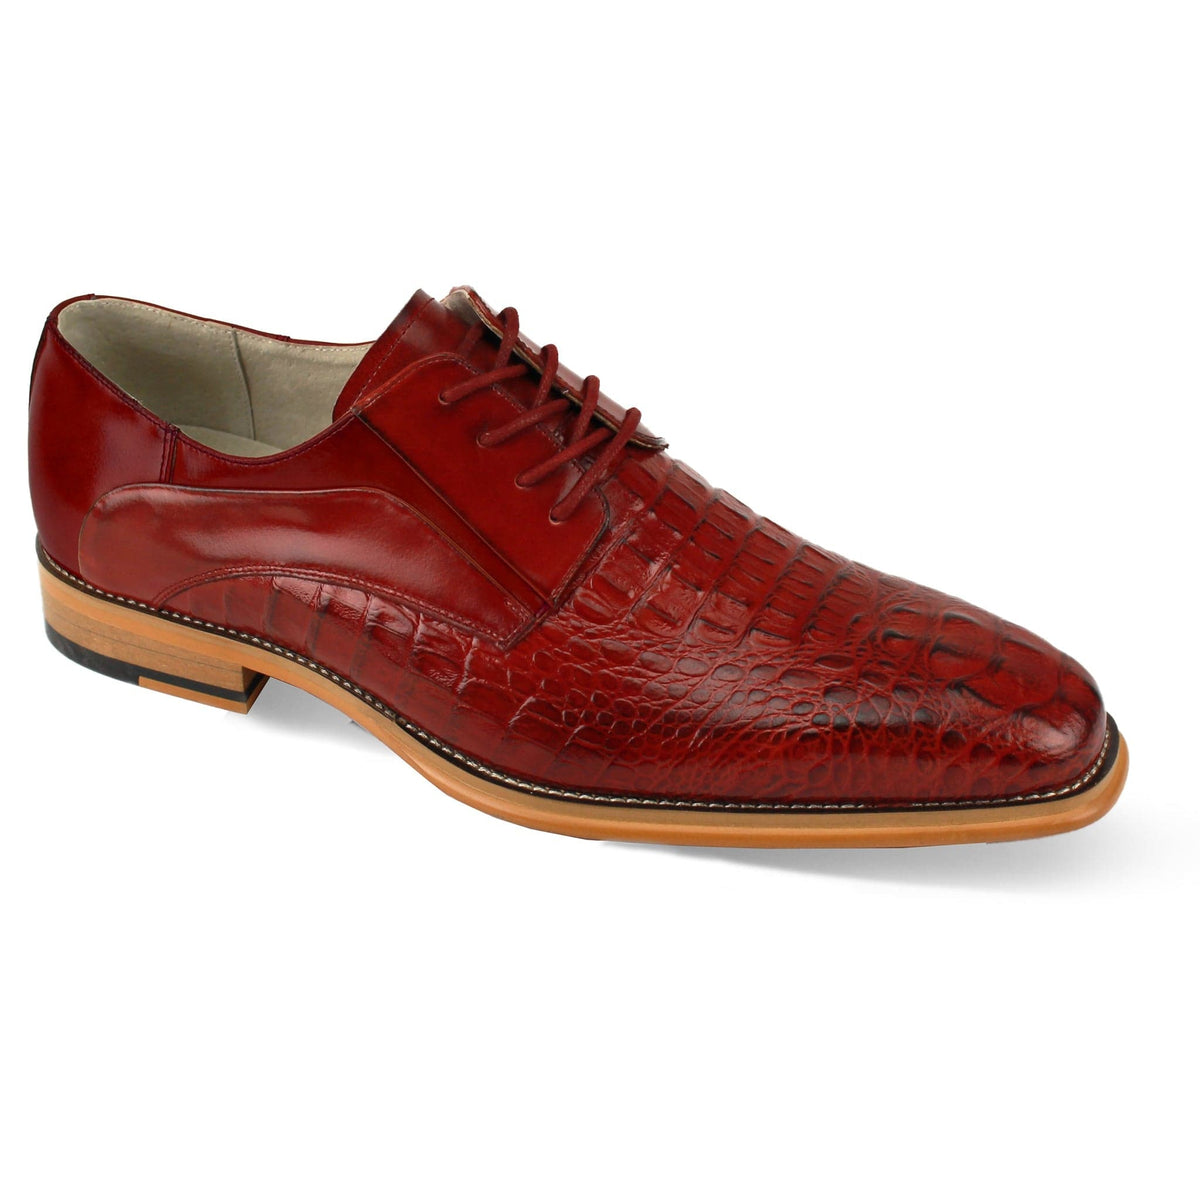 GIOVANNI LEATHER SHOES FT RED / 7 GIOVANNI LEATHER SHOES-MASON-RED